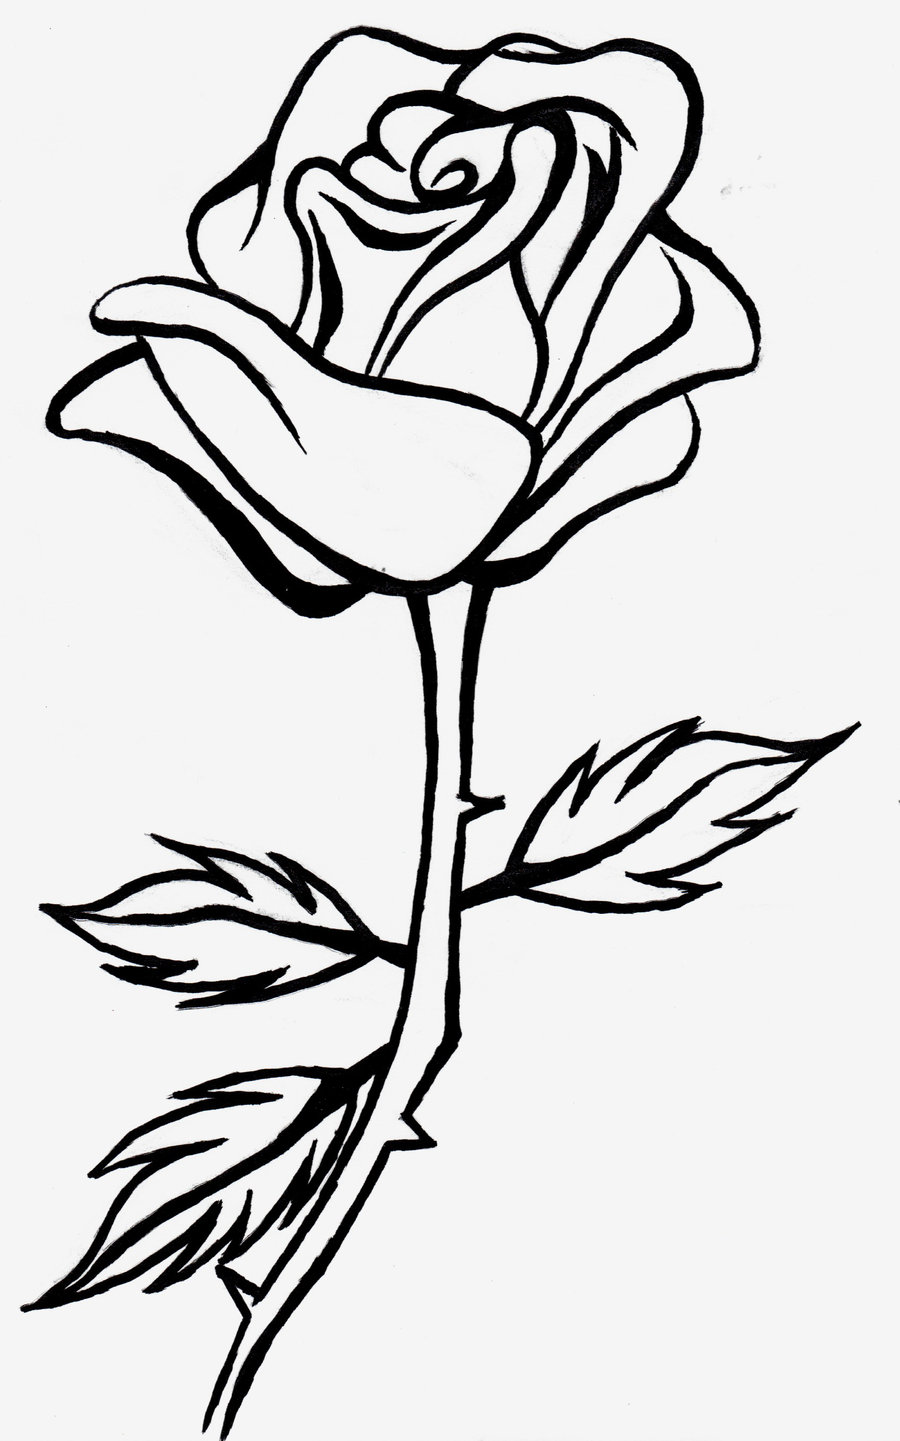 rose clipart